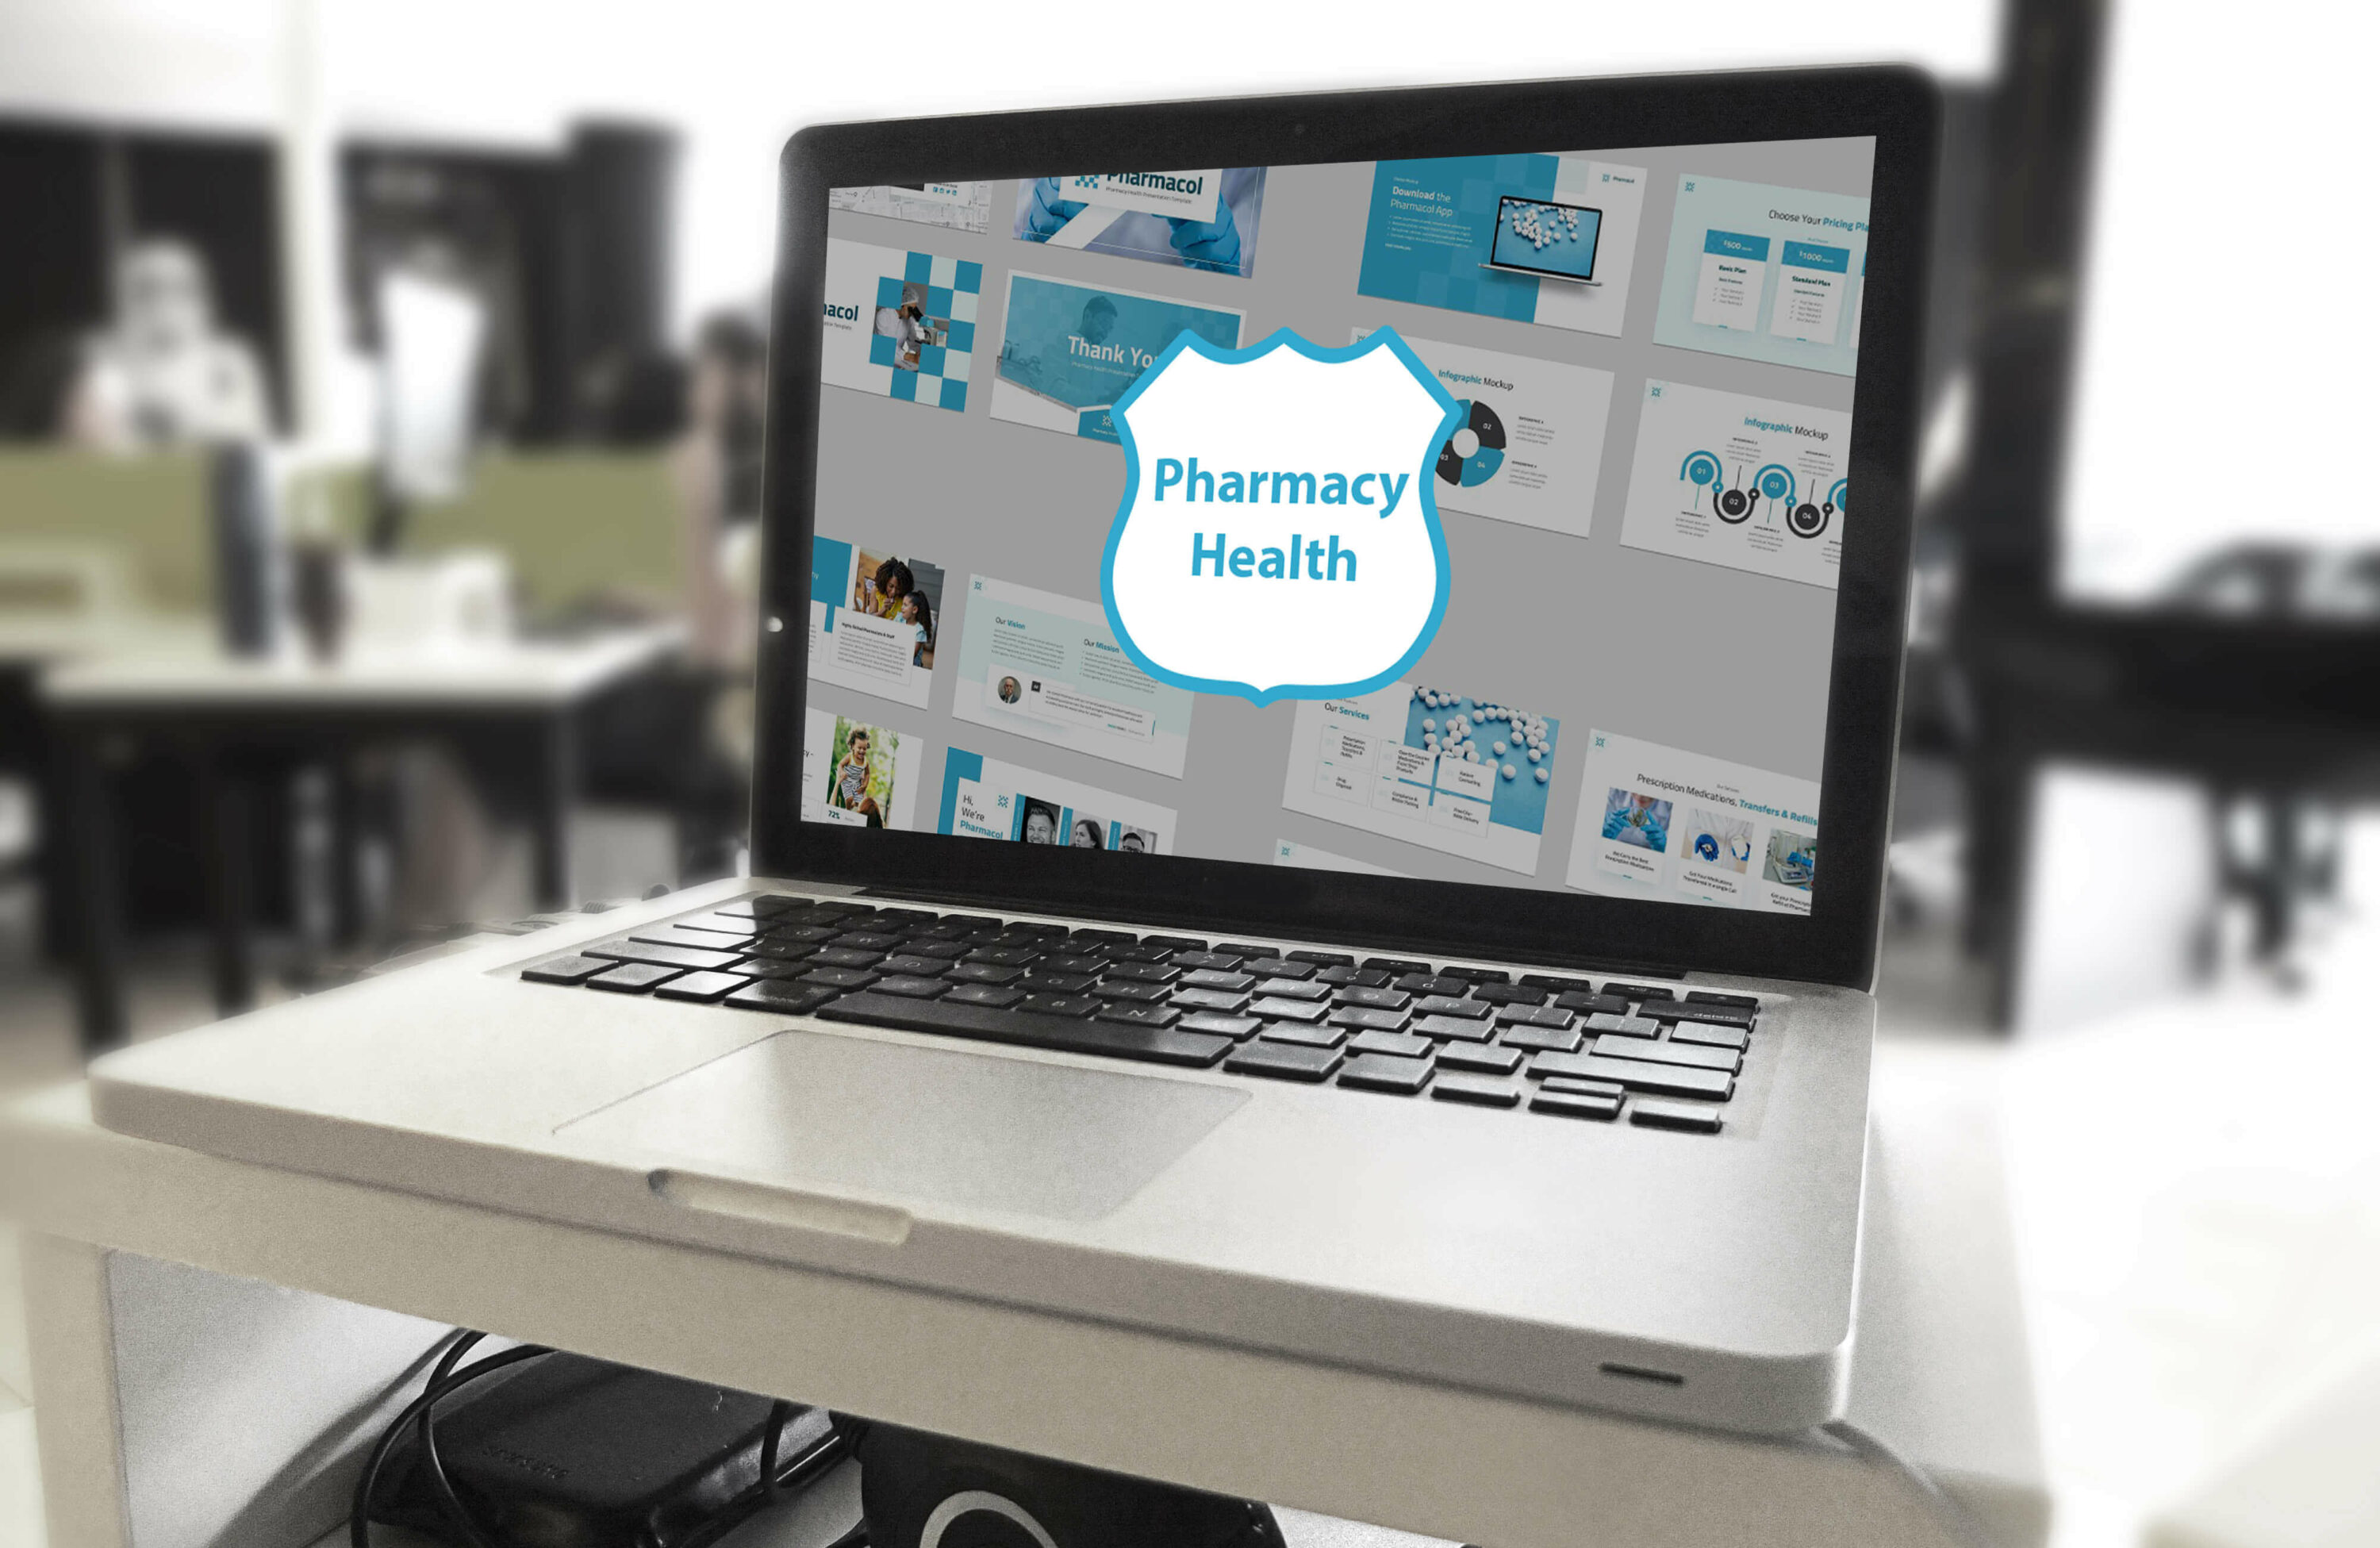 Preview Pharmacy Health on notebook.